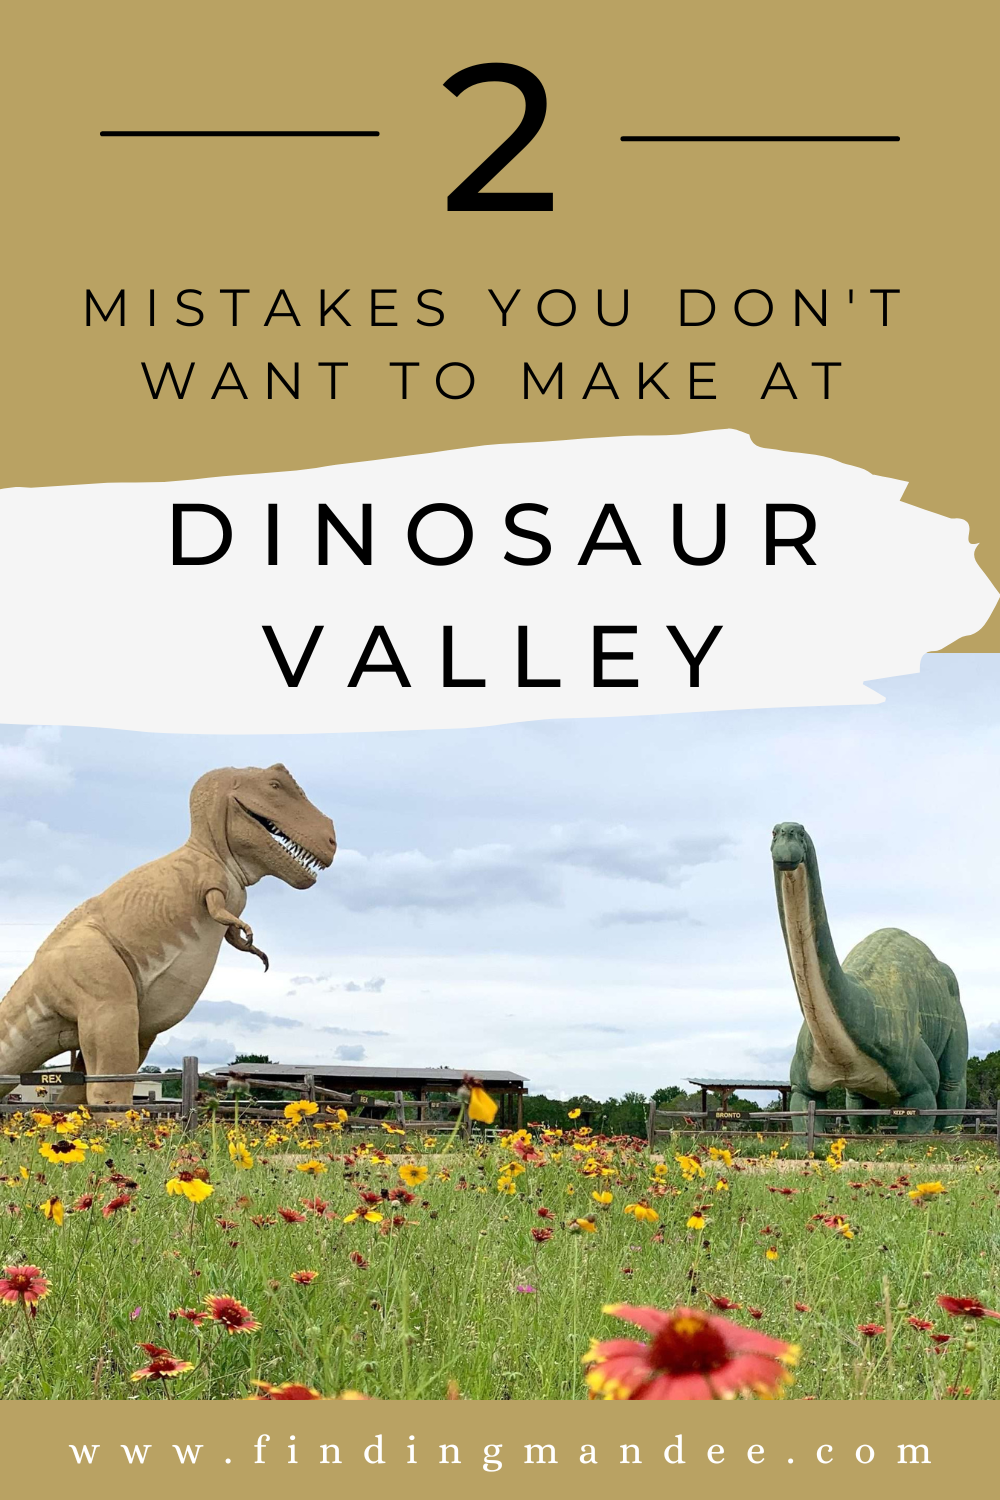 Dinosaur Valley State Park: 2 Mistakes You Don't Want To Make | Finding Mandee